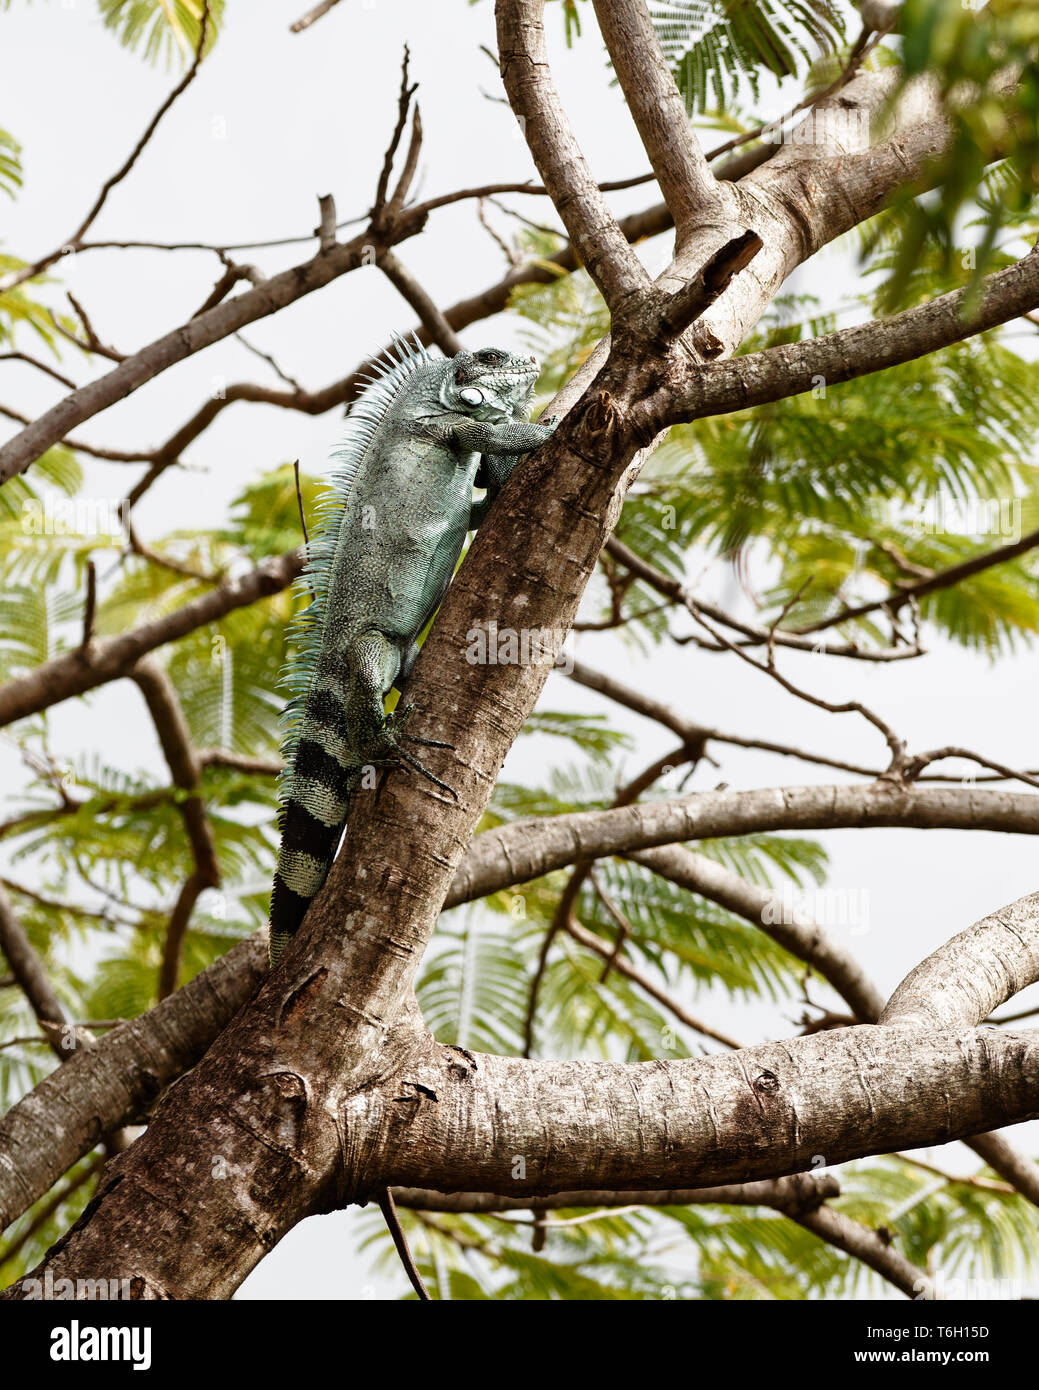 A large iguana (Iguanidae) in the crown of a large tree, it is placed on a thick branch, set against the background - Location: Caribbean, Guadeloupe Stock Photo